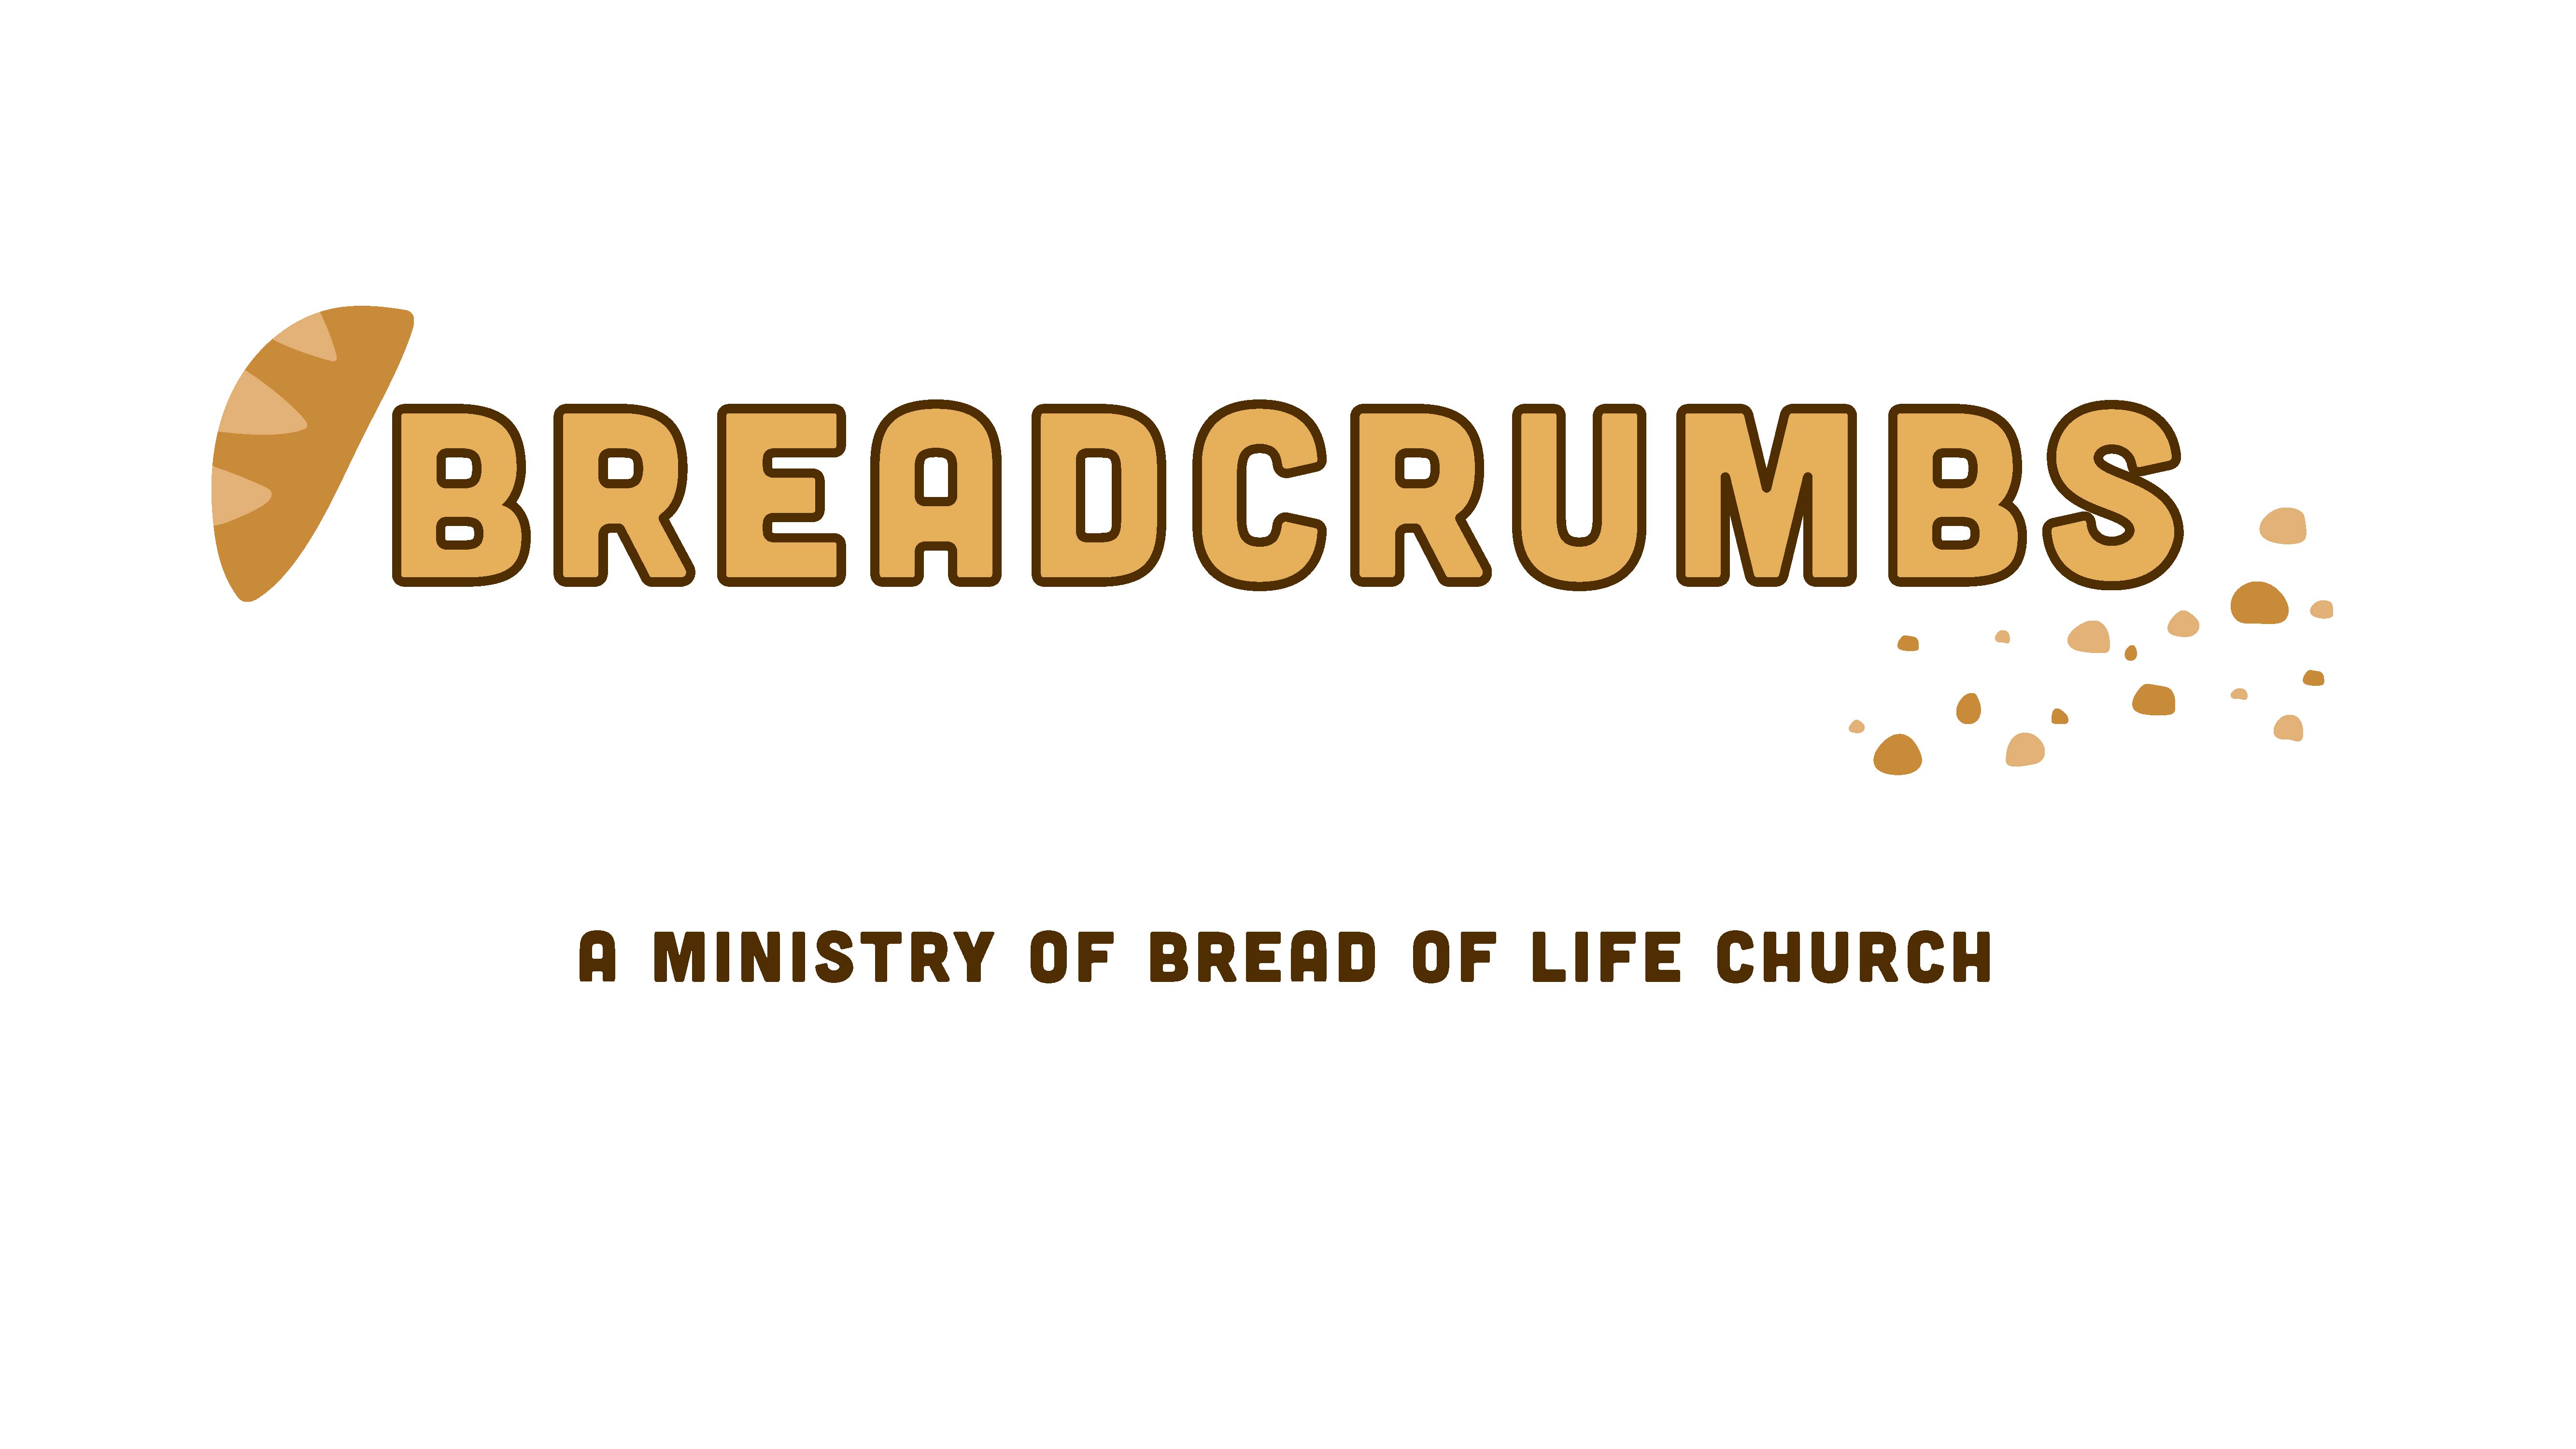 You are currently viewing Breadcrumbs in December